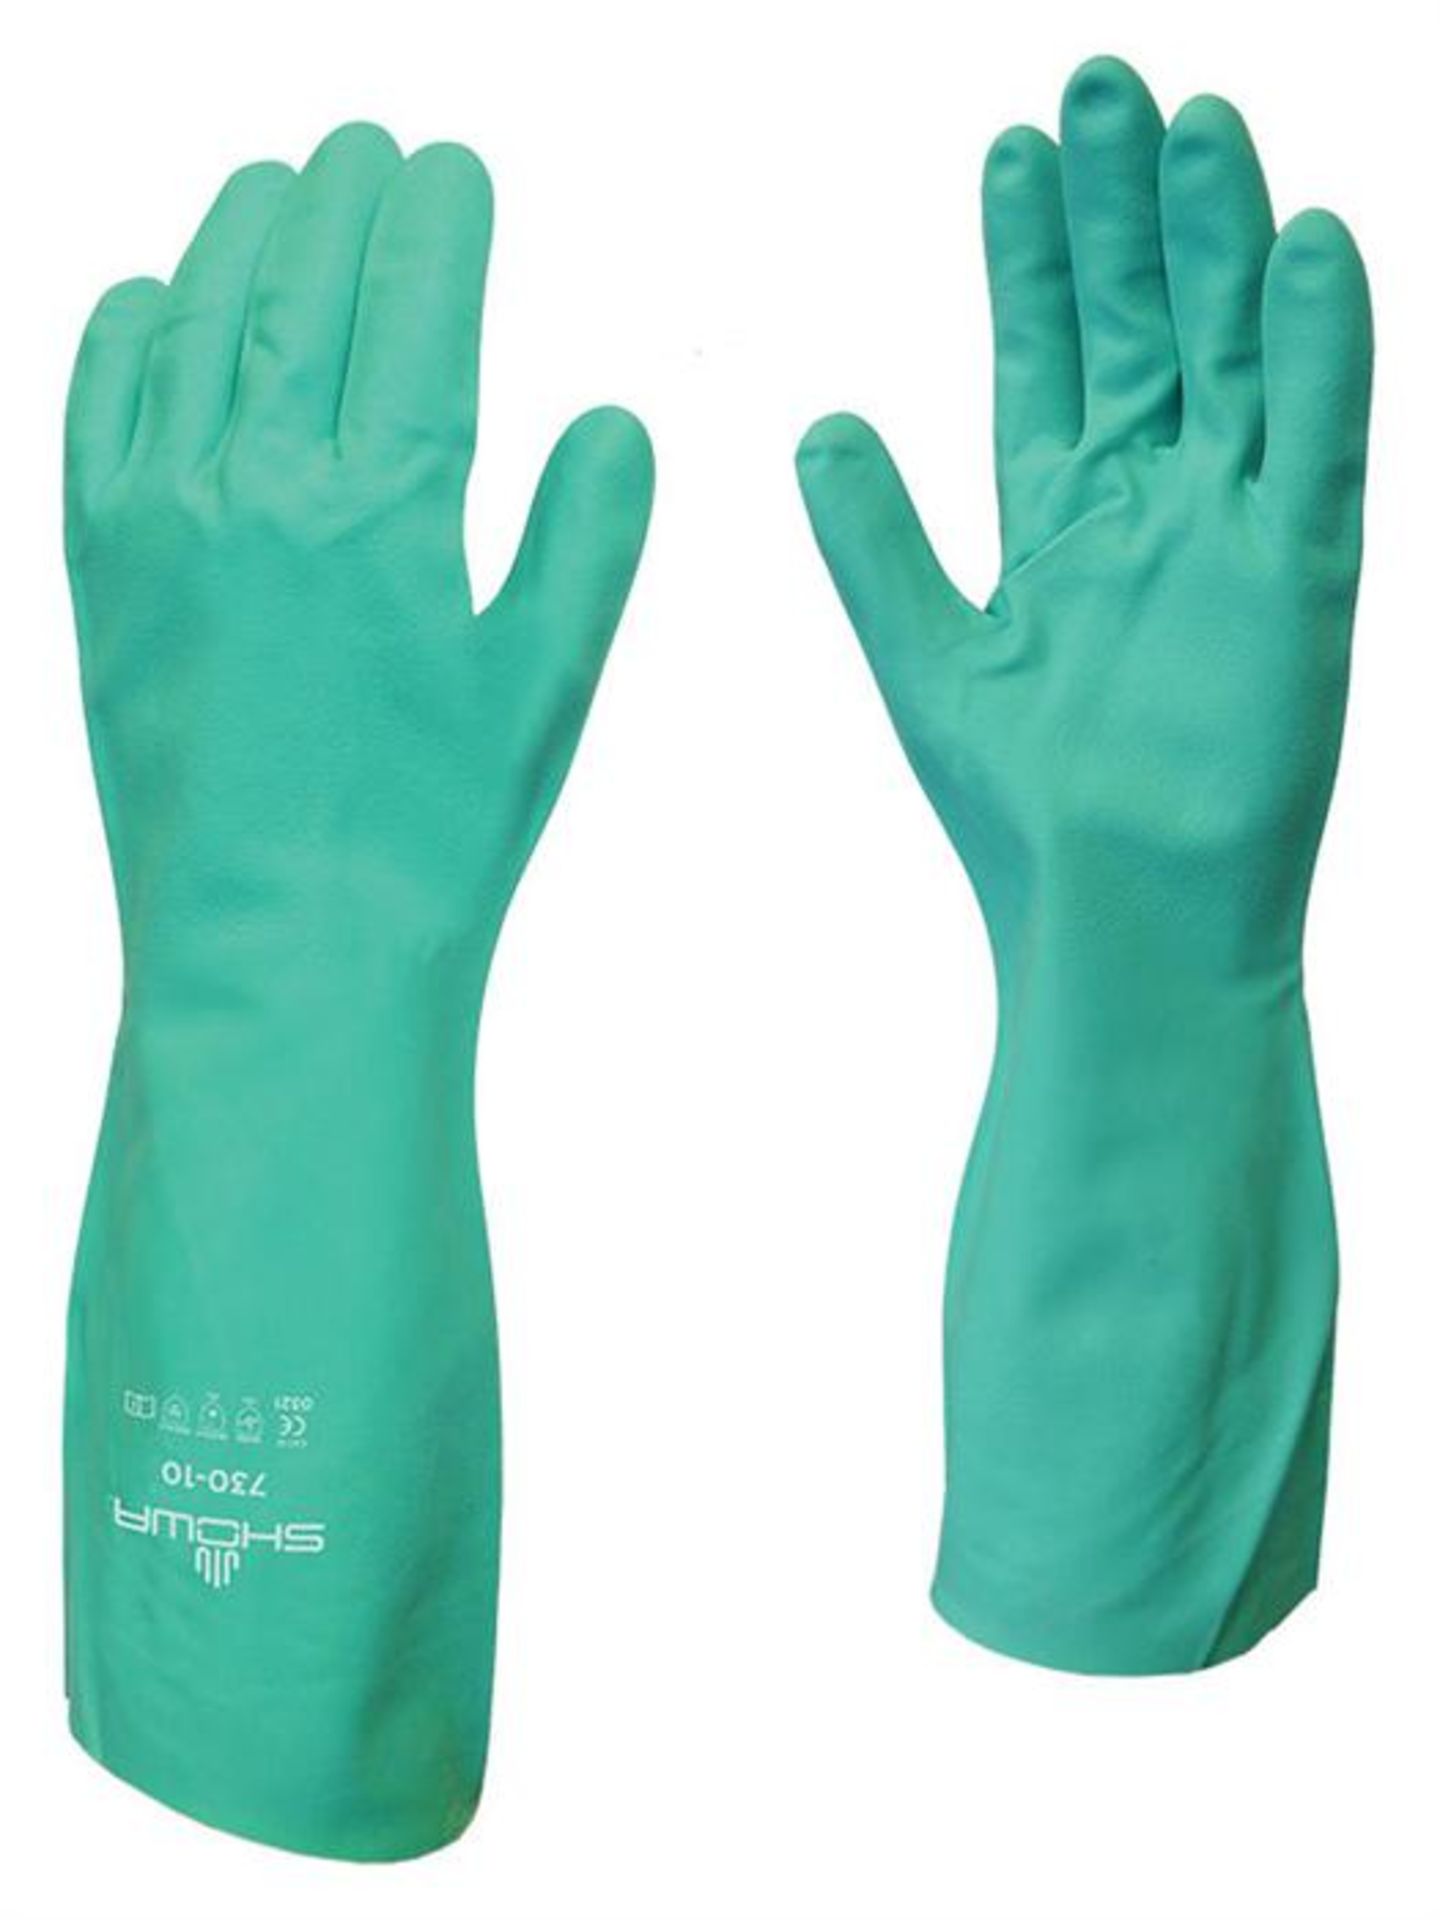 144 Pairs of Showa 730 Chemical Resistant Gloves